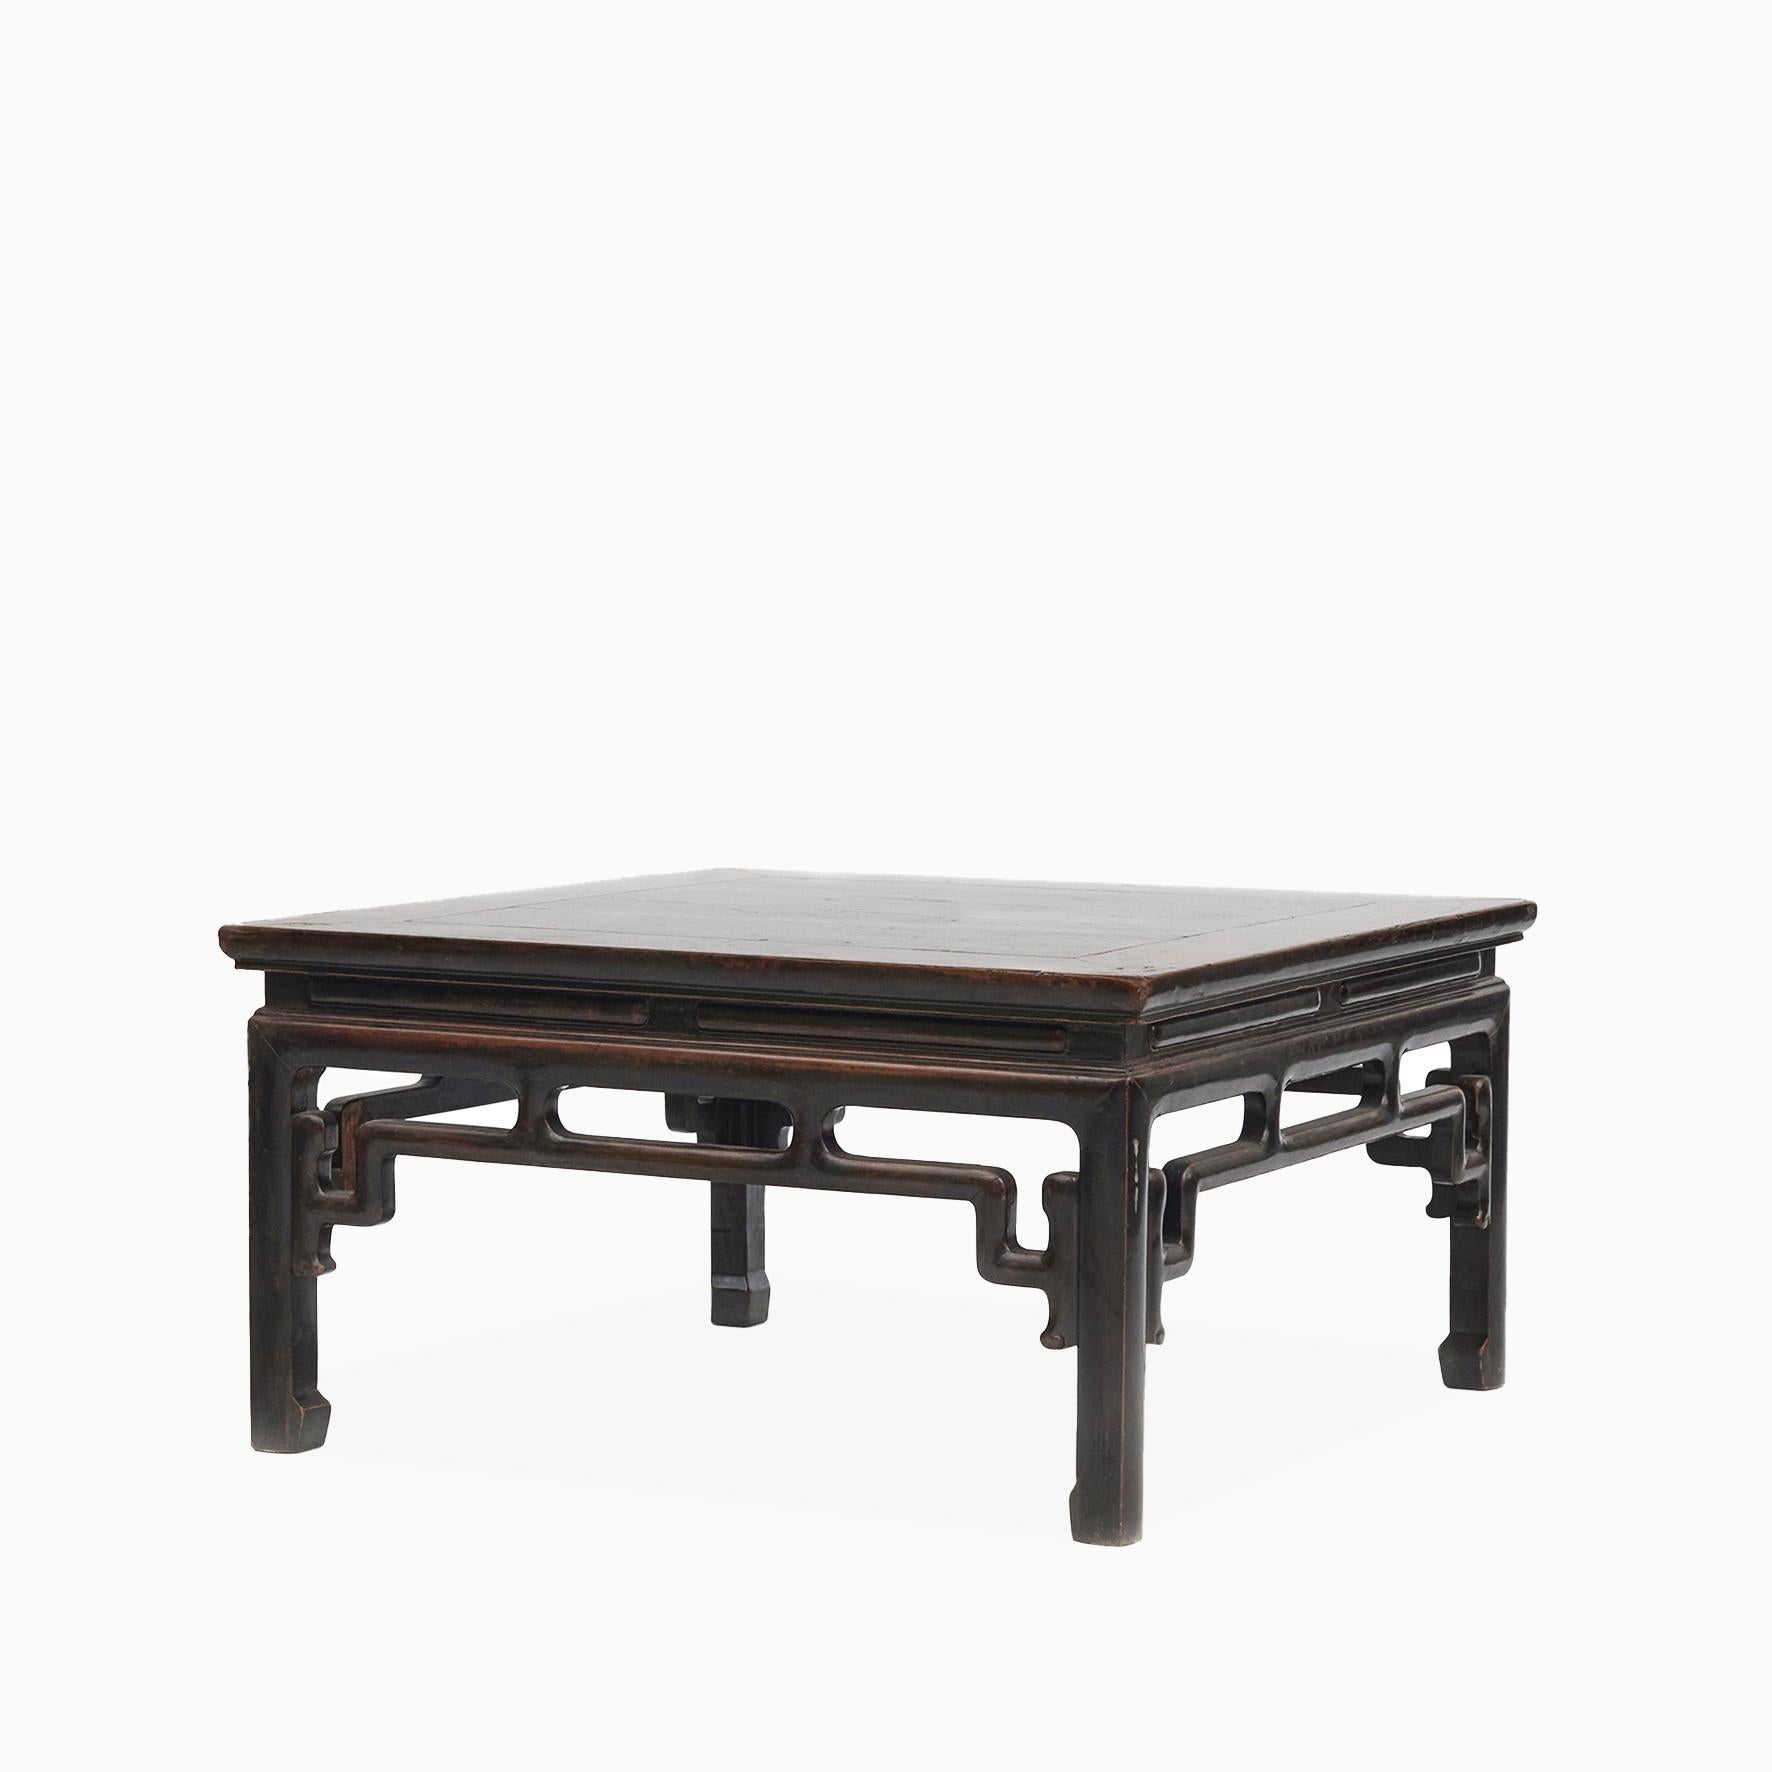 A Chinese Qing Dynasty period walnut wood coffee table from the 19th century
Square top with waisted apron atop a black lacquered frame and horse hoof legs.

The table has a natural age-related patina enhanced with a clear lacquer finish.

China